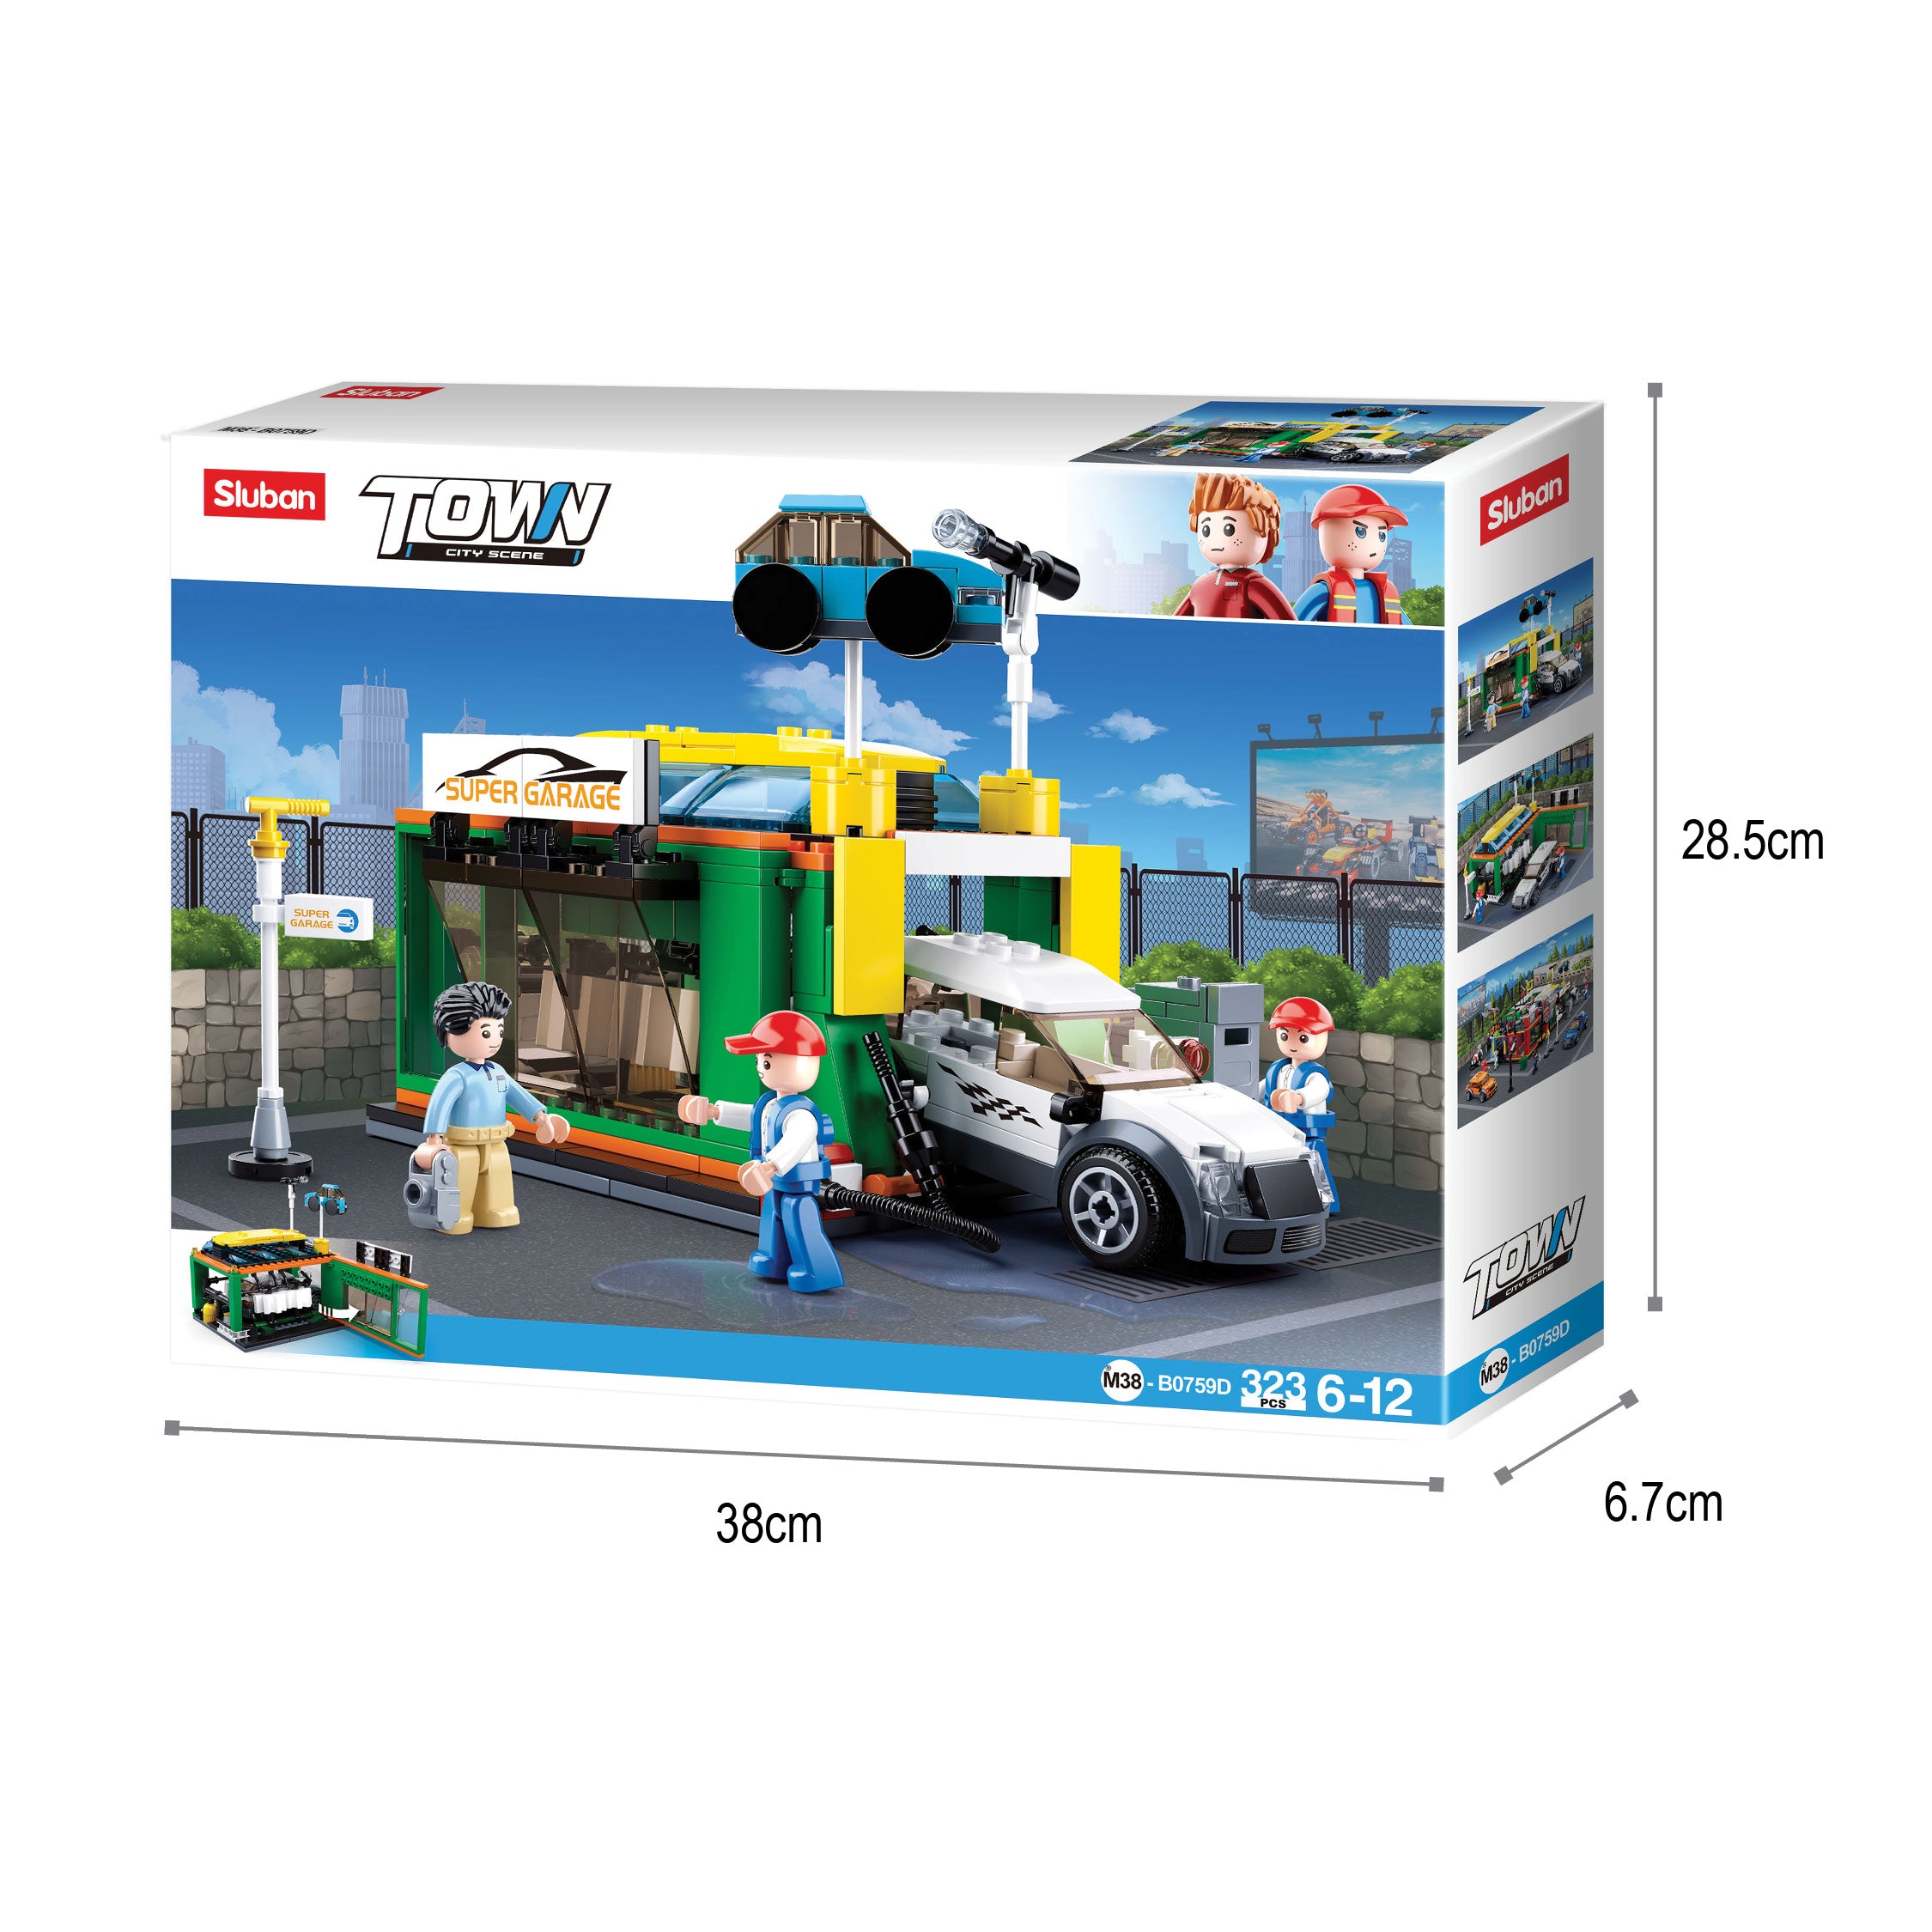 Sluban®  Car Wash (M38-B0759D) (323 Pieces) Building Blocks Kit For Boys Aged 6 Years And Above Creative Construction Set Educational Stem Toy, Ideal For Gifting Birthday Gift Return Gift, Blocks Compatible With Other Leading Brands, Bis Certified.